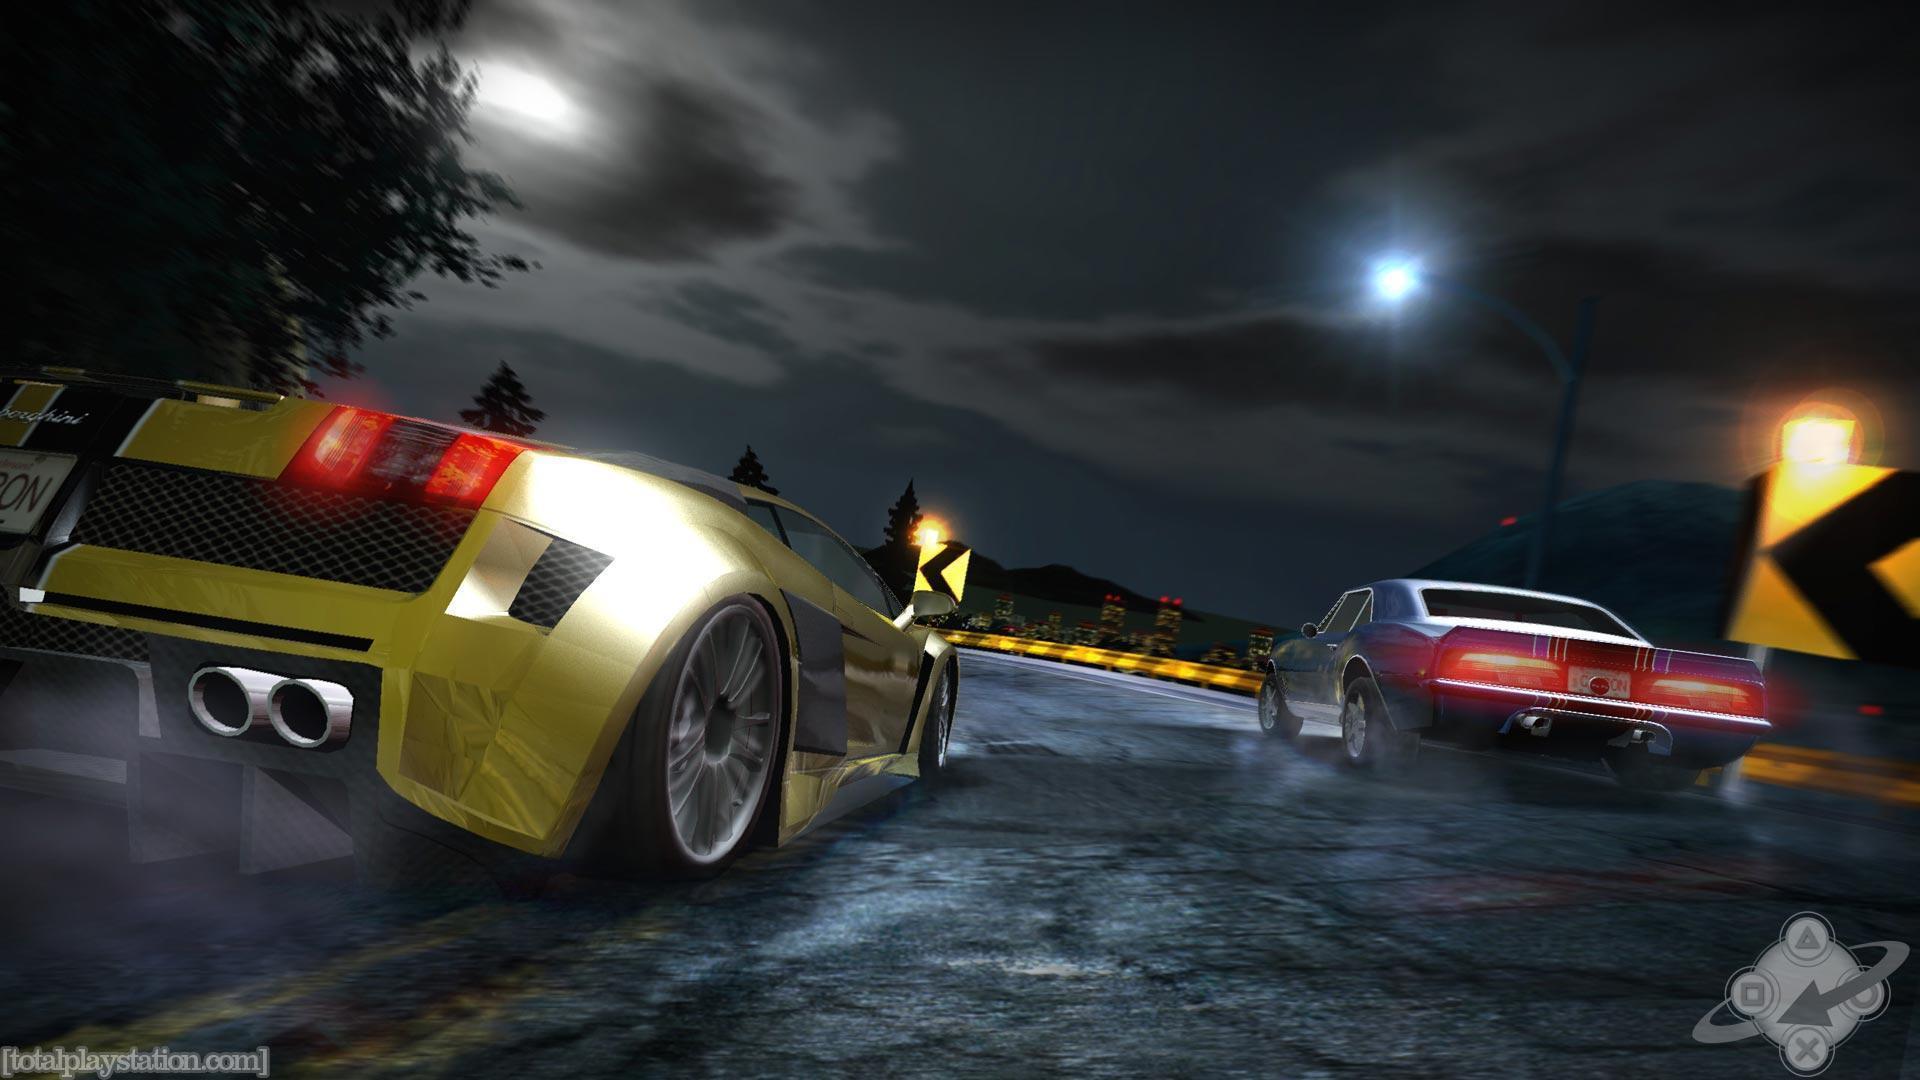 Nfs Carbon Wallpaper HD Need For Speed Carbon 39445 Nfscarbon 3